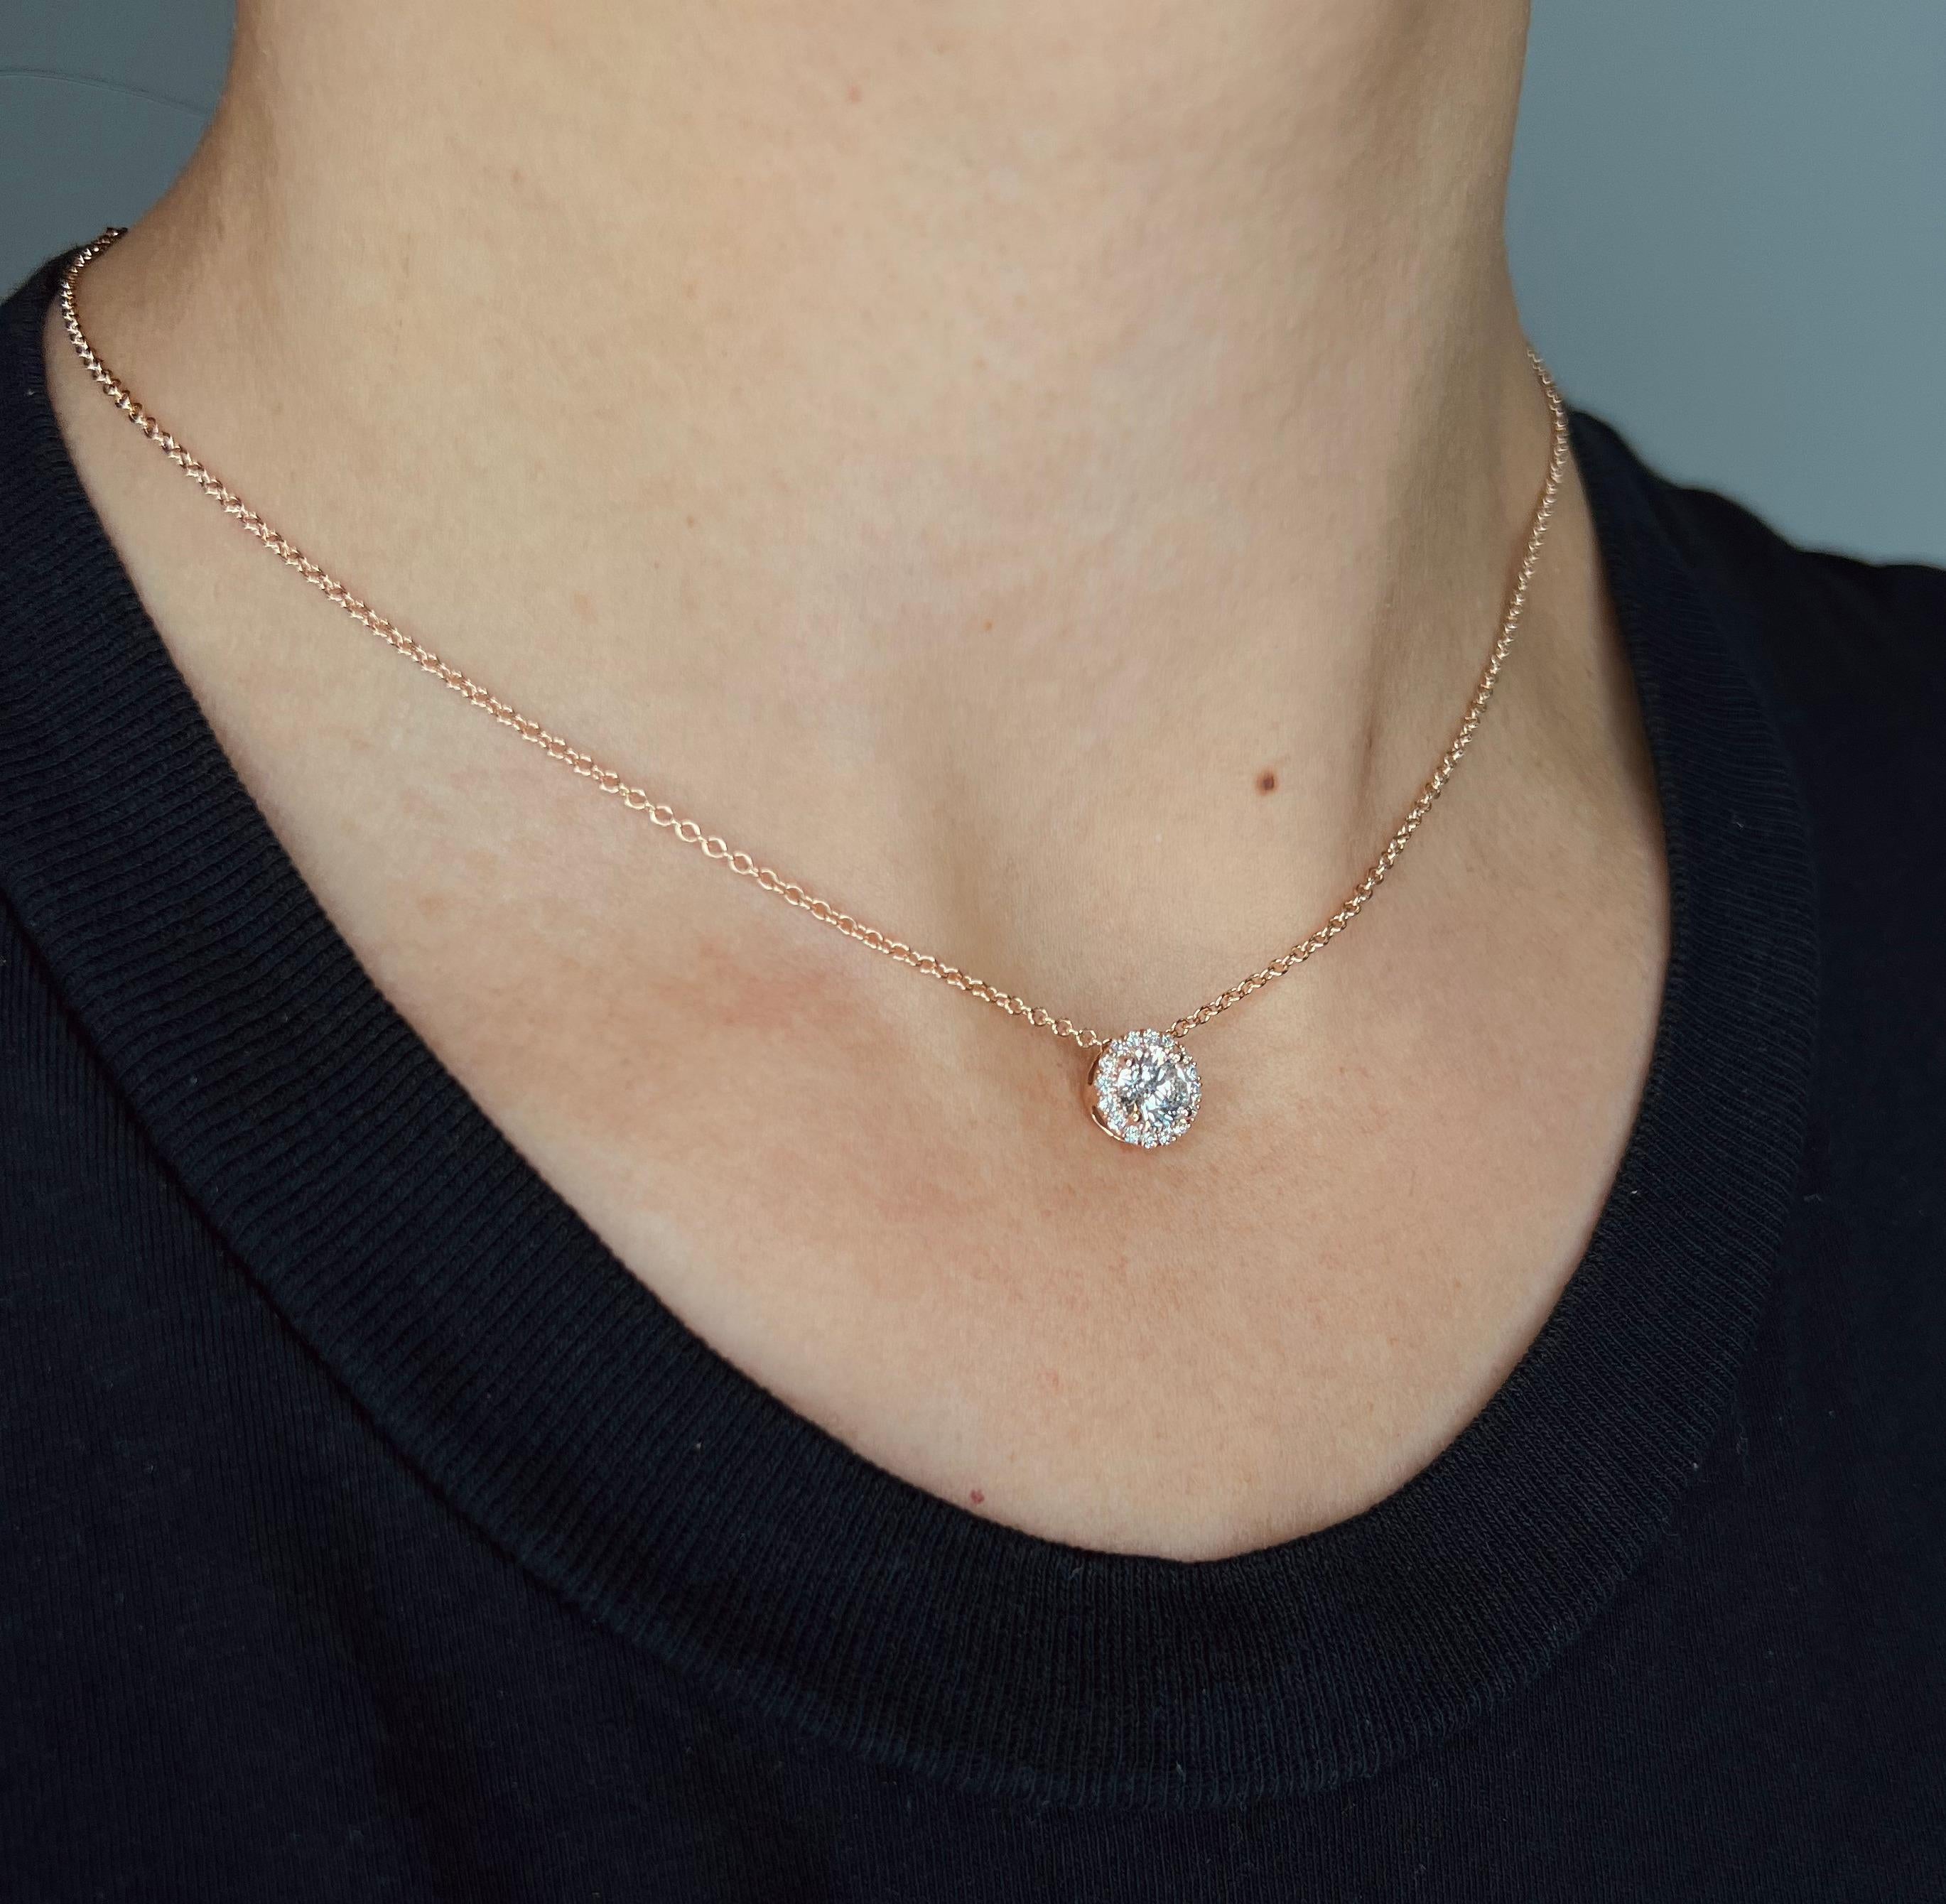 This diamond circle pendant provides a glowing chic look.
Metal: 14k Gold
Diamond Total Carats (Includes 0.15ct halo):0.40 Total (.25ct Center
Diamond Cut: Round Natural Diamonds (Not Lab Grown)
Diamond Clarity: VS
Diamond Color: F-G
Color: White